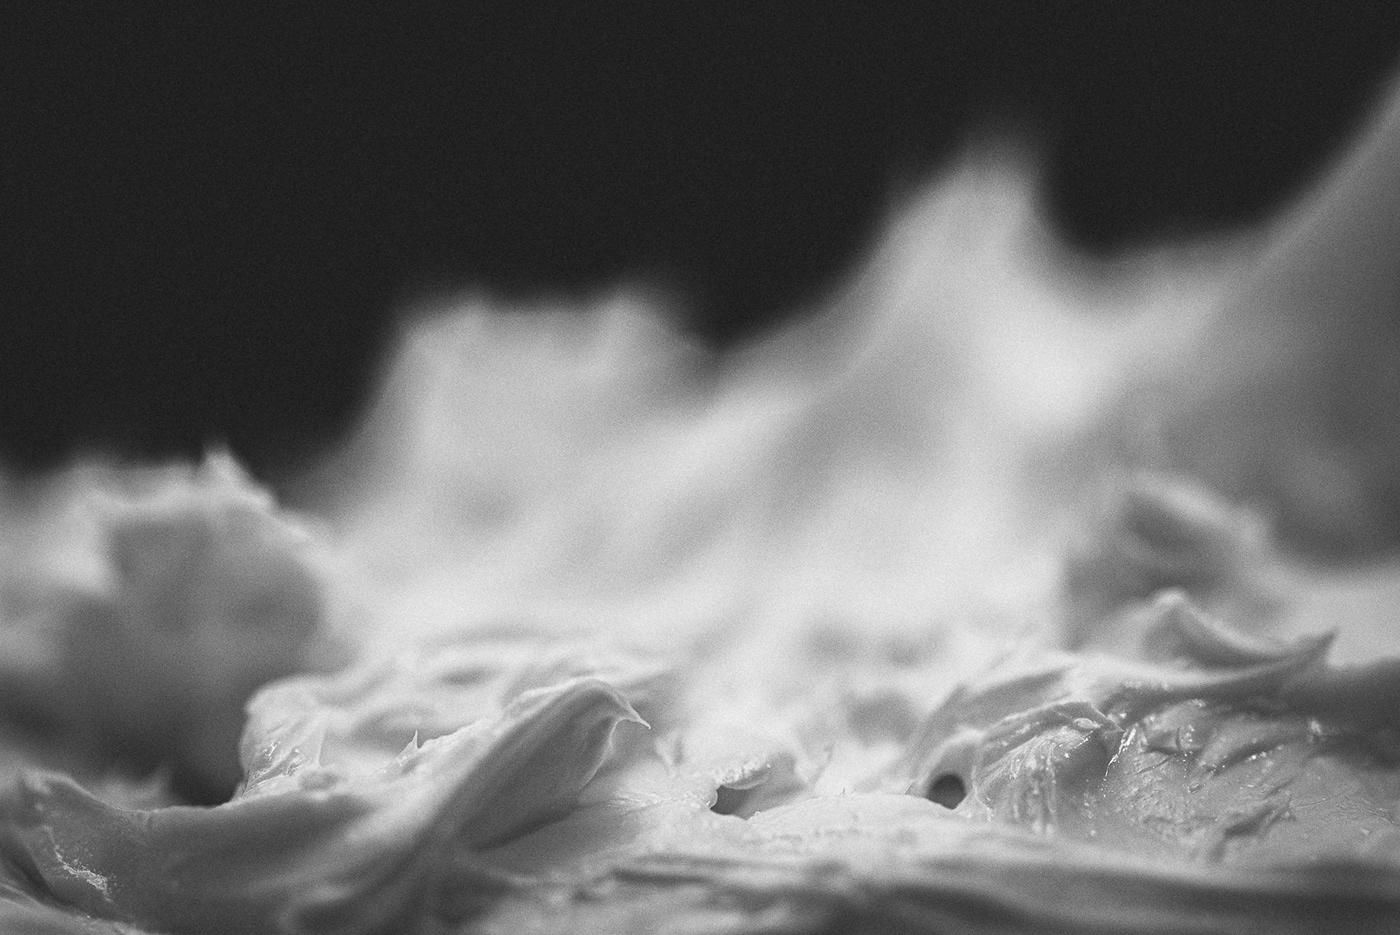 abstract black and white creme experimental photography experimentell macro makro Nivea Schwarzweiß structures